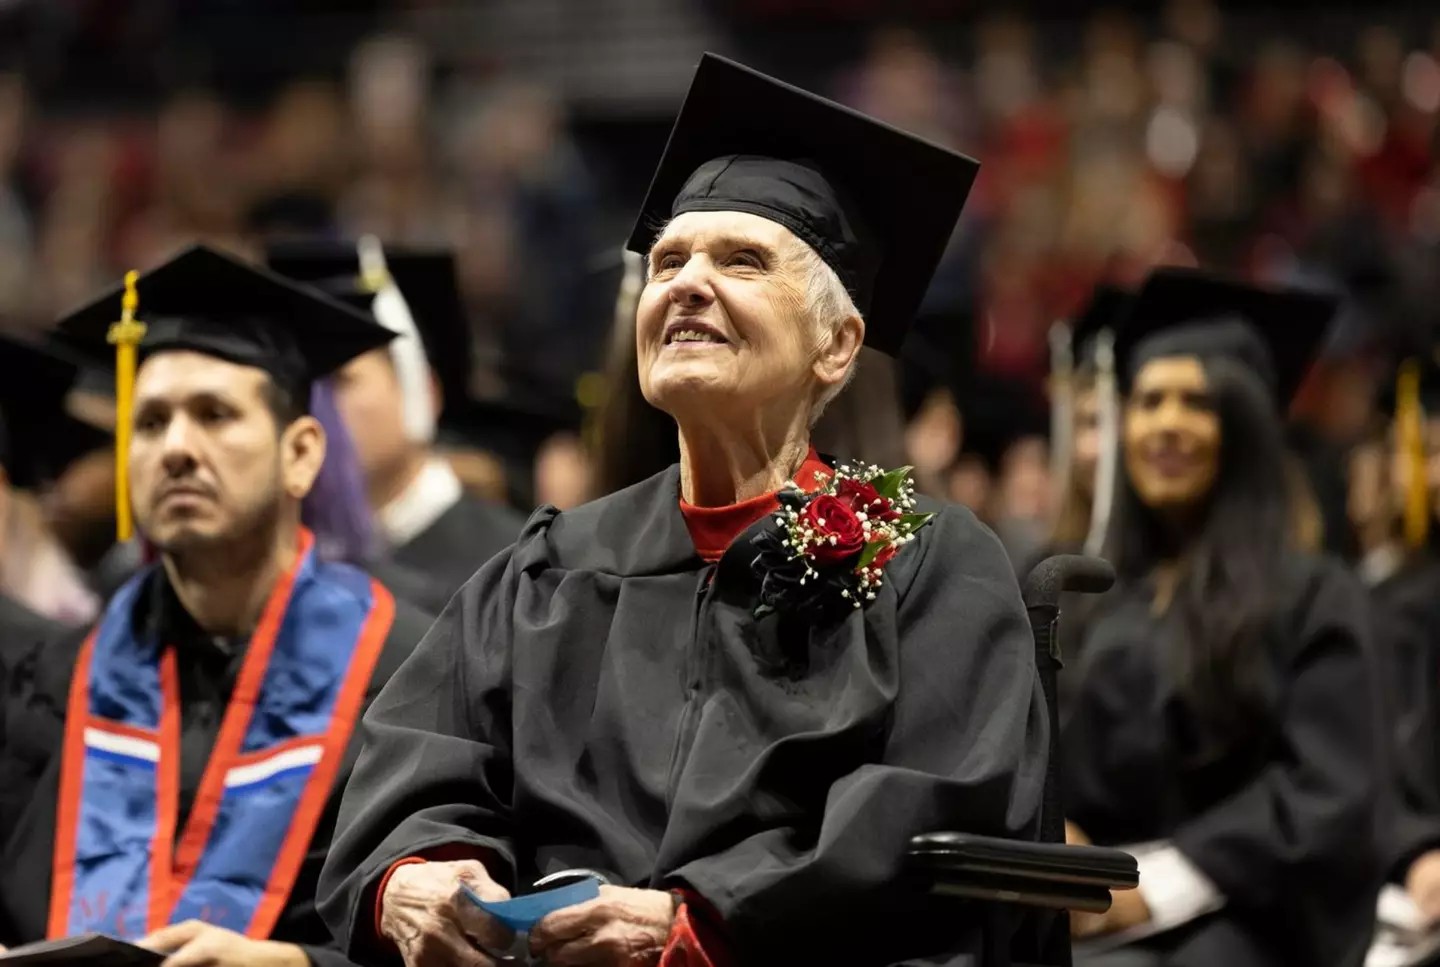 Joyce started college in 1951 and graduated in 2022.